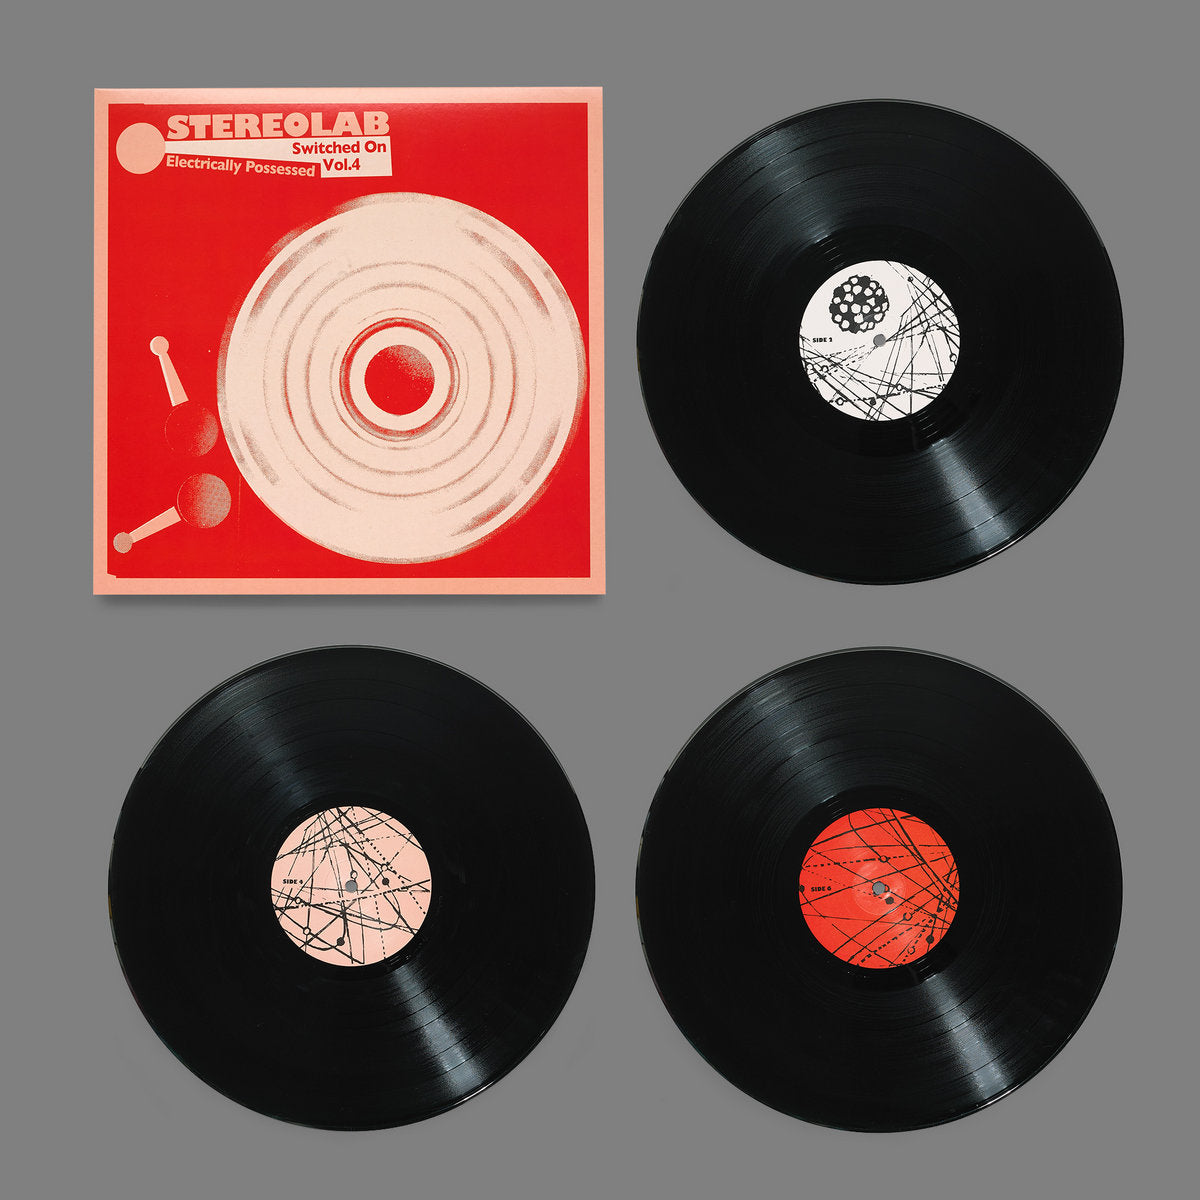 Stereolab - Electrically Possessed: Switched on Vol.4 | Buy on Vinyl LP